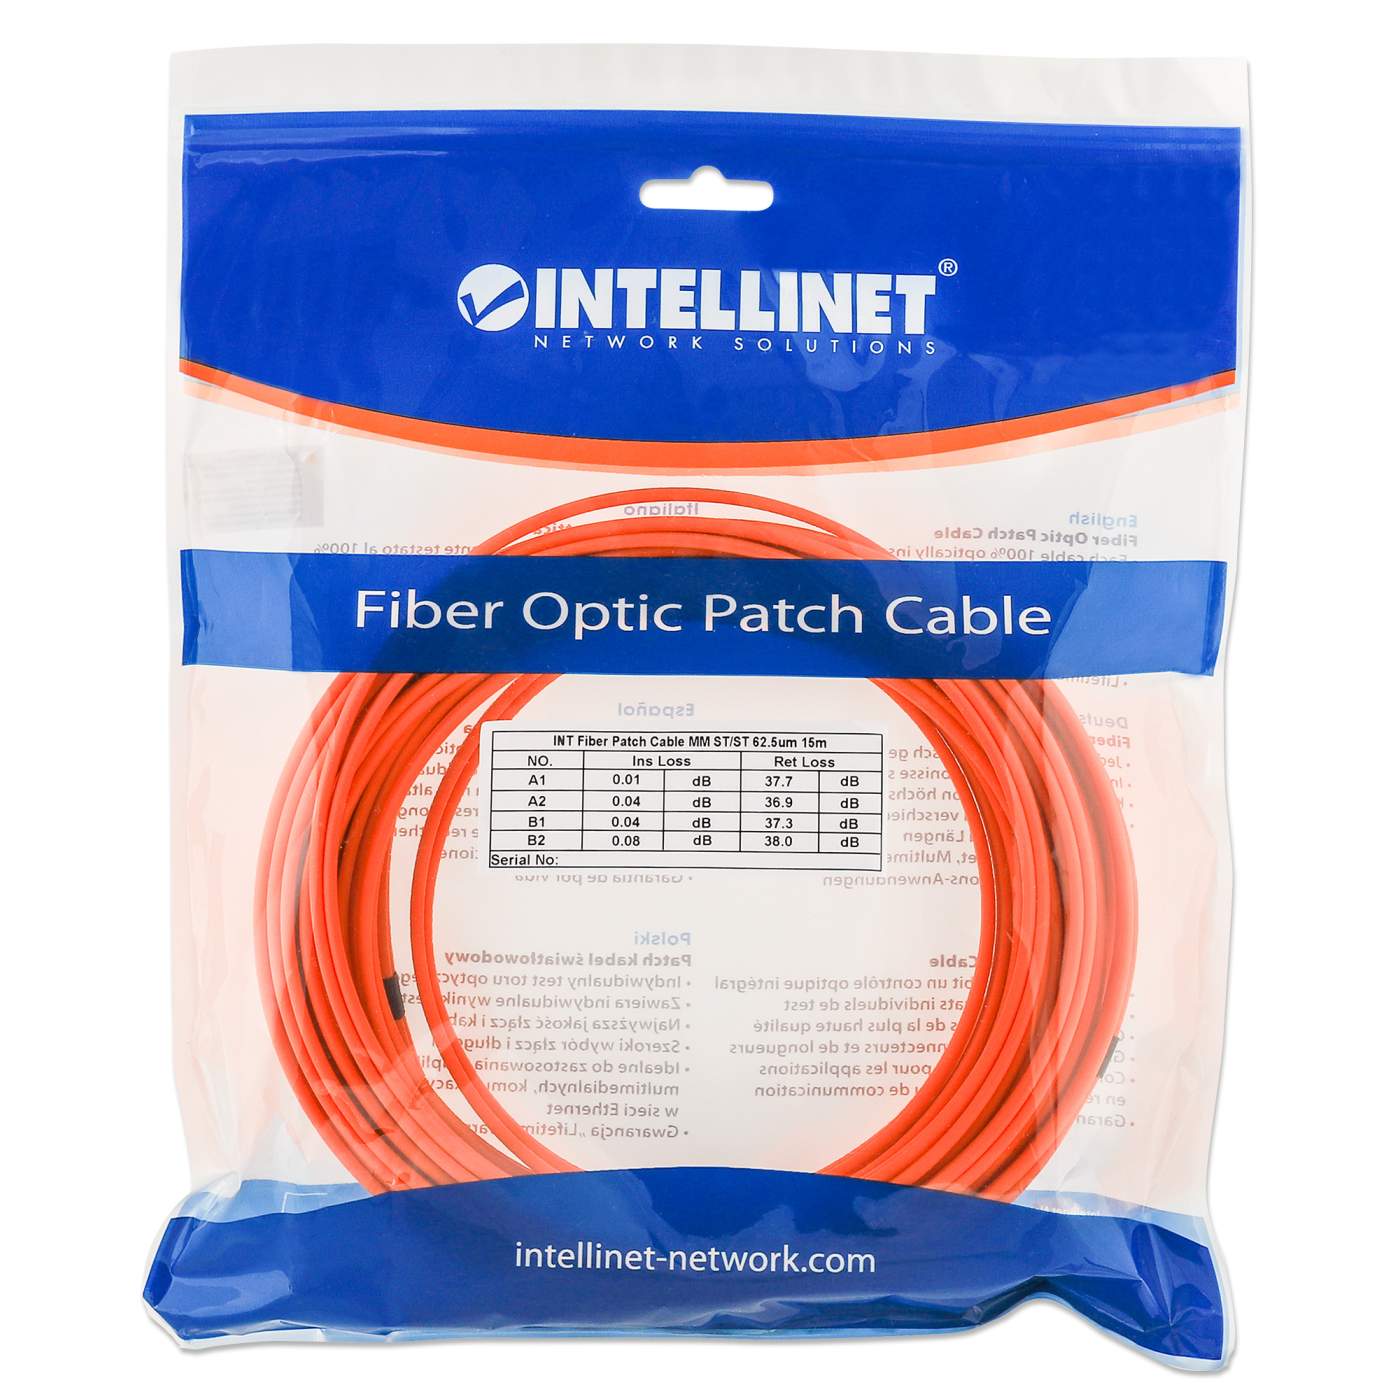 Fiber Optic Patch Cable, Duplex, Multimode  Packaging Image 2